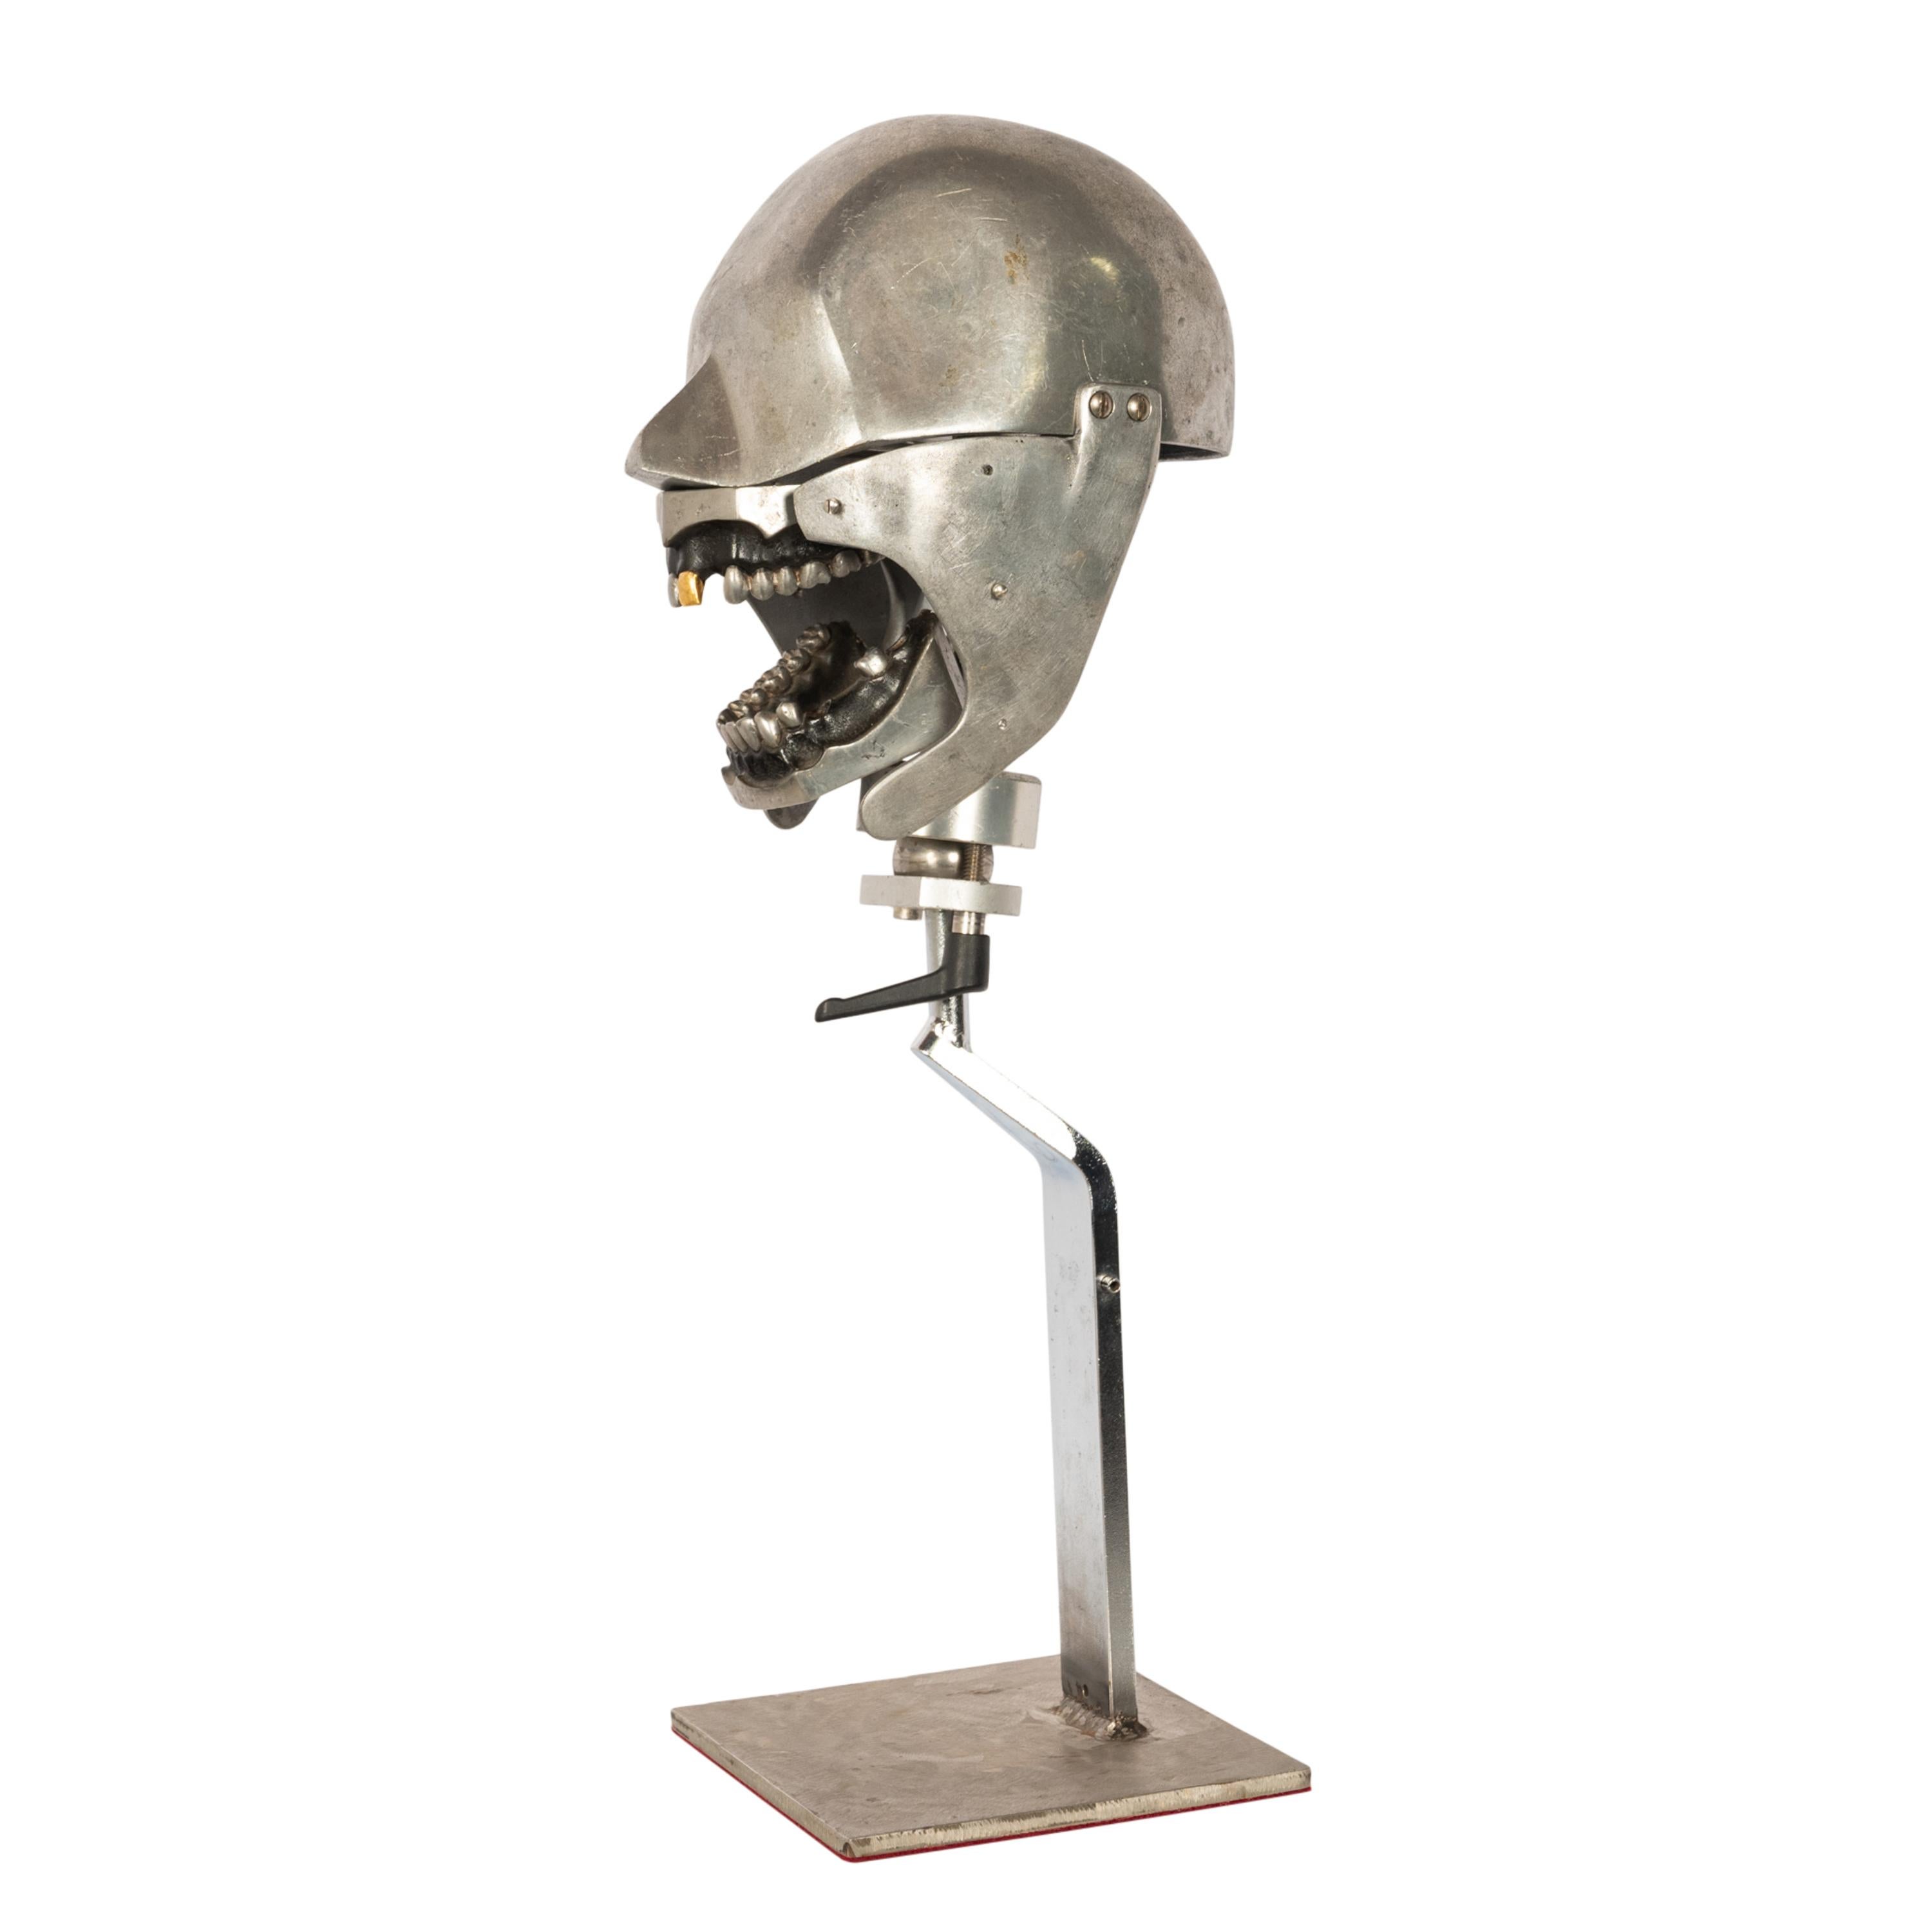 Early 20th Century Antique Aluminum Teaching Dental Phantom Head Skull on Stand Gold Tooth 1920's 